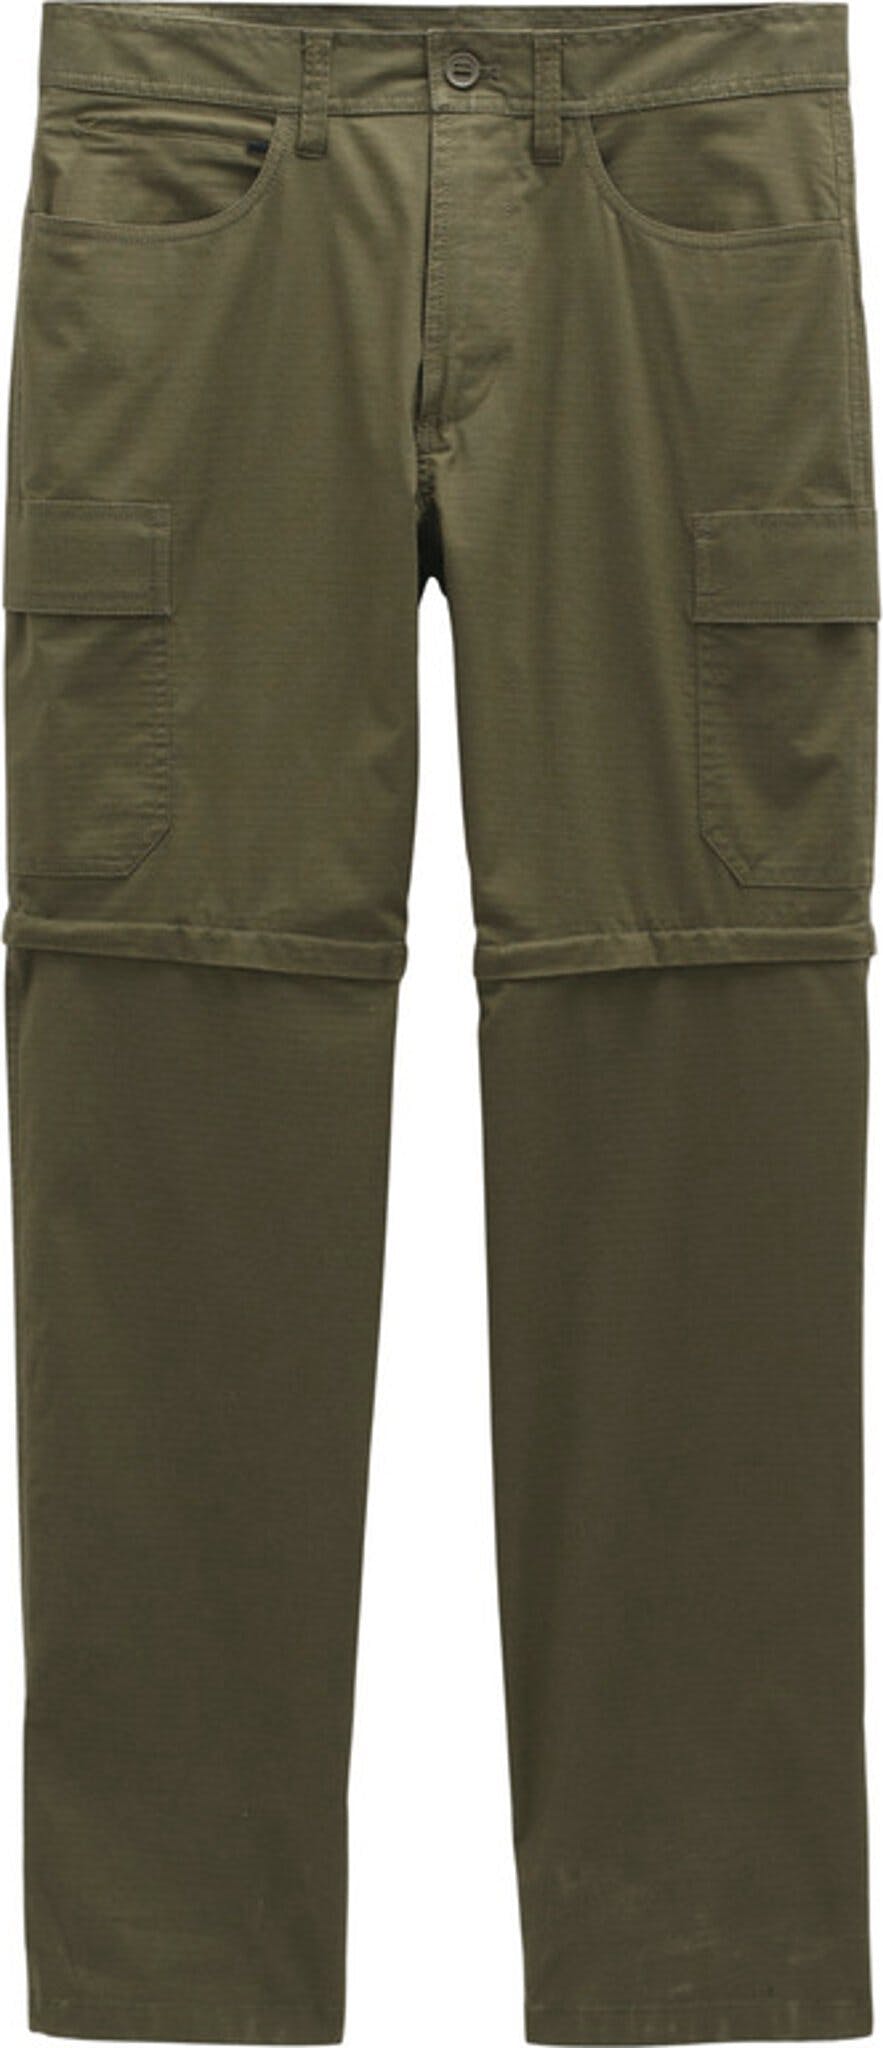 Product image for Double Peak Convertible Pant - Men's